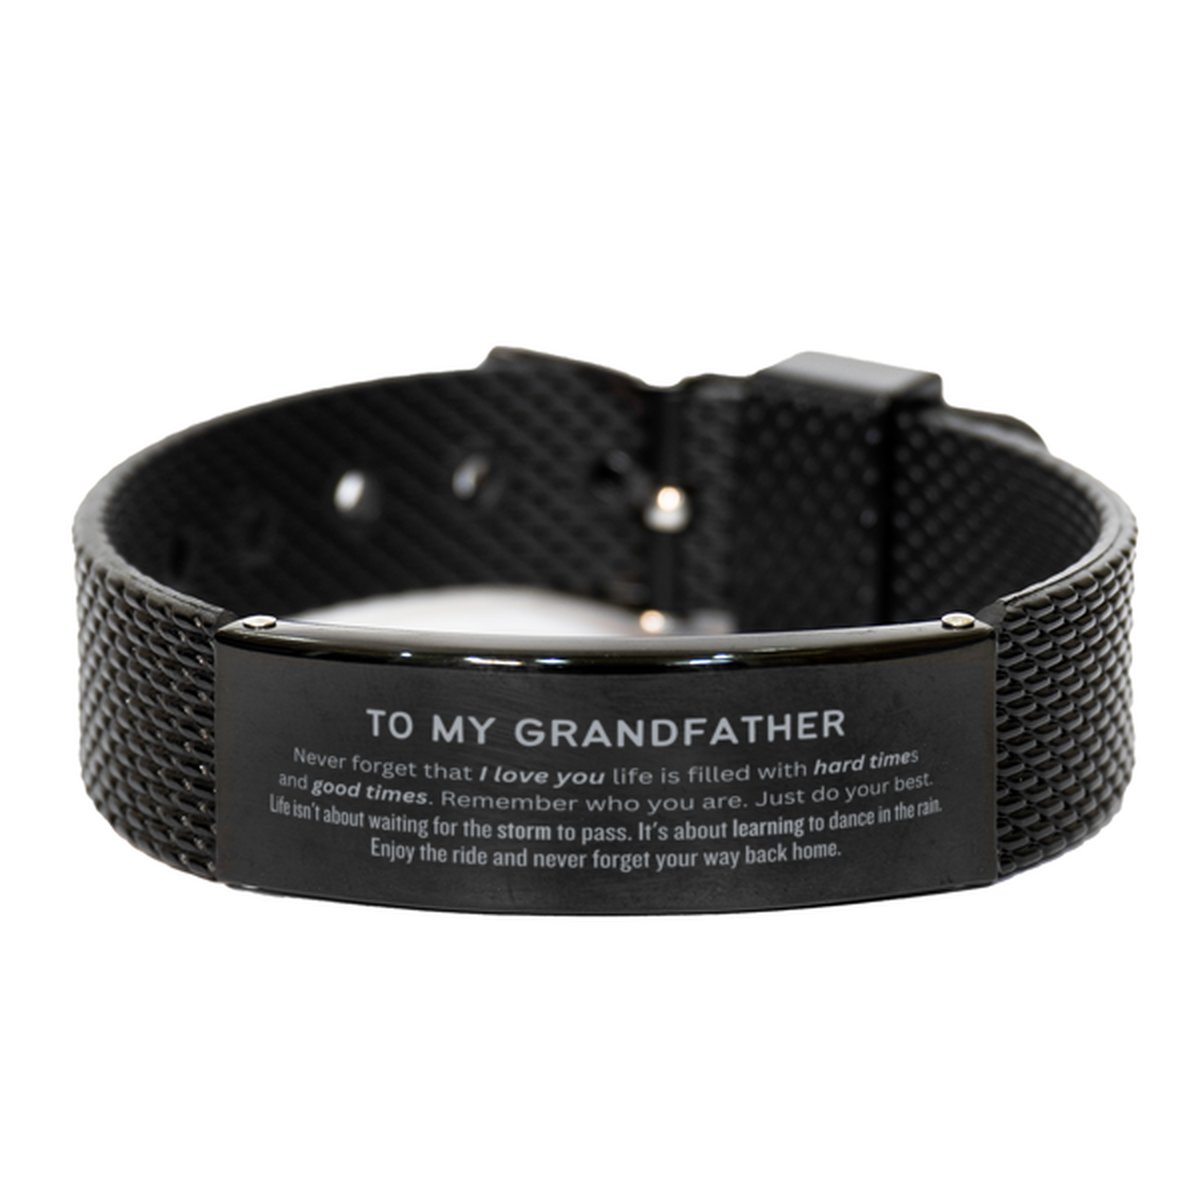 Christmas Grandfather Black Shark Mesh Bracelet Gifts, To My Grandfather Birthday Thank You Gifts For Grandfather, Graduation Unique Gifts For Grandfather To My Grandfather Never forget that I love you life is filled with hard times and good times. Rememb